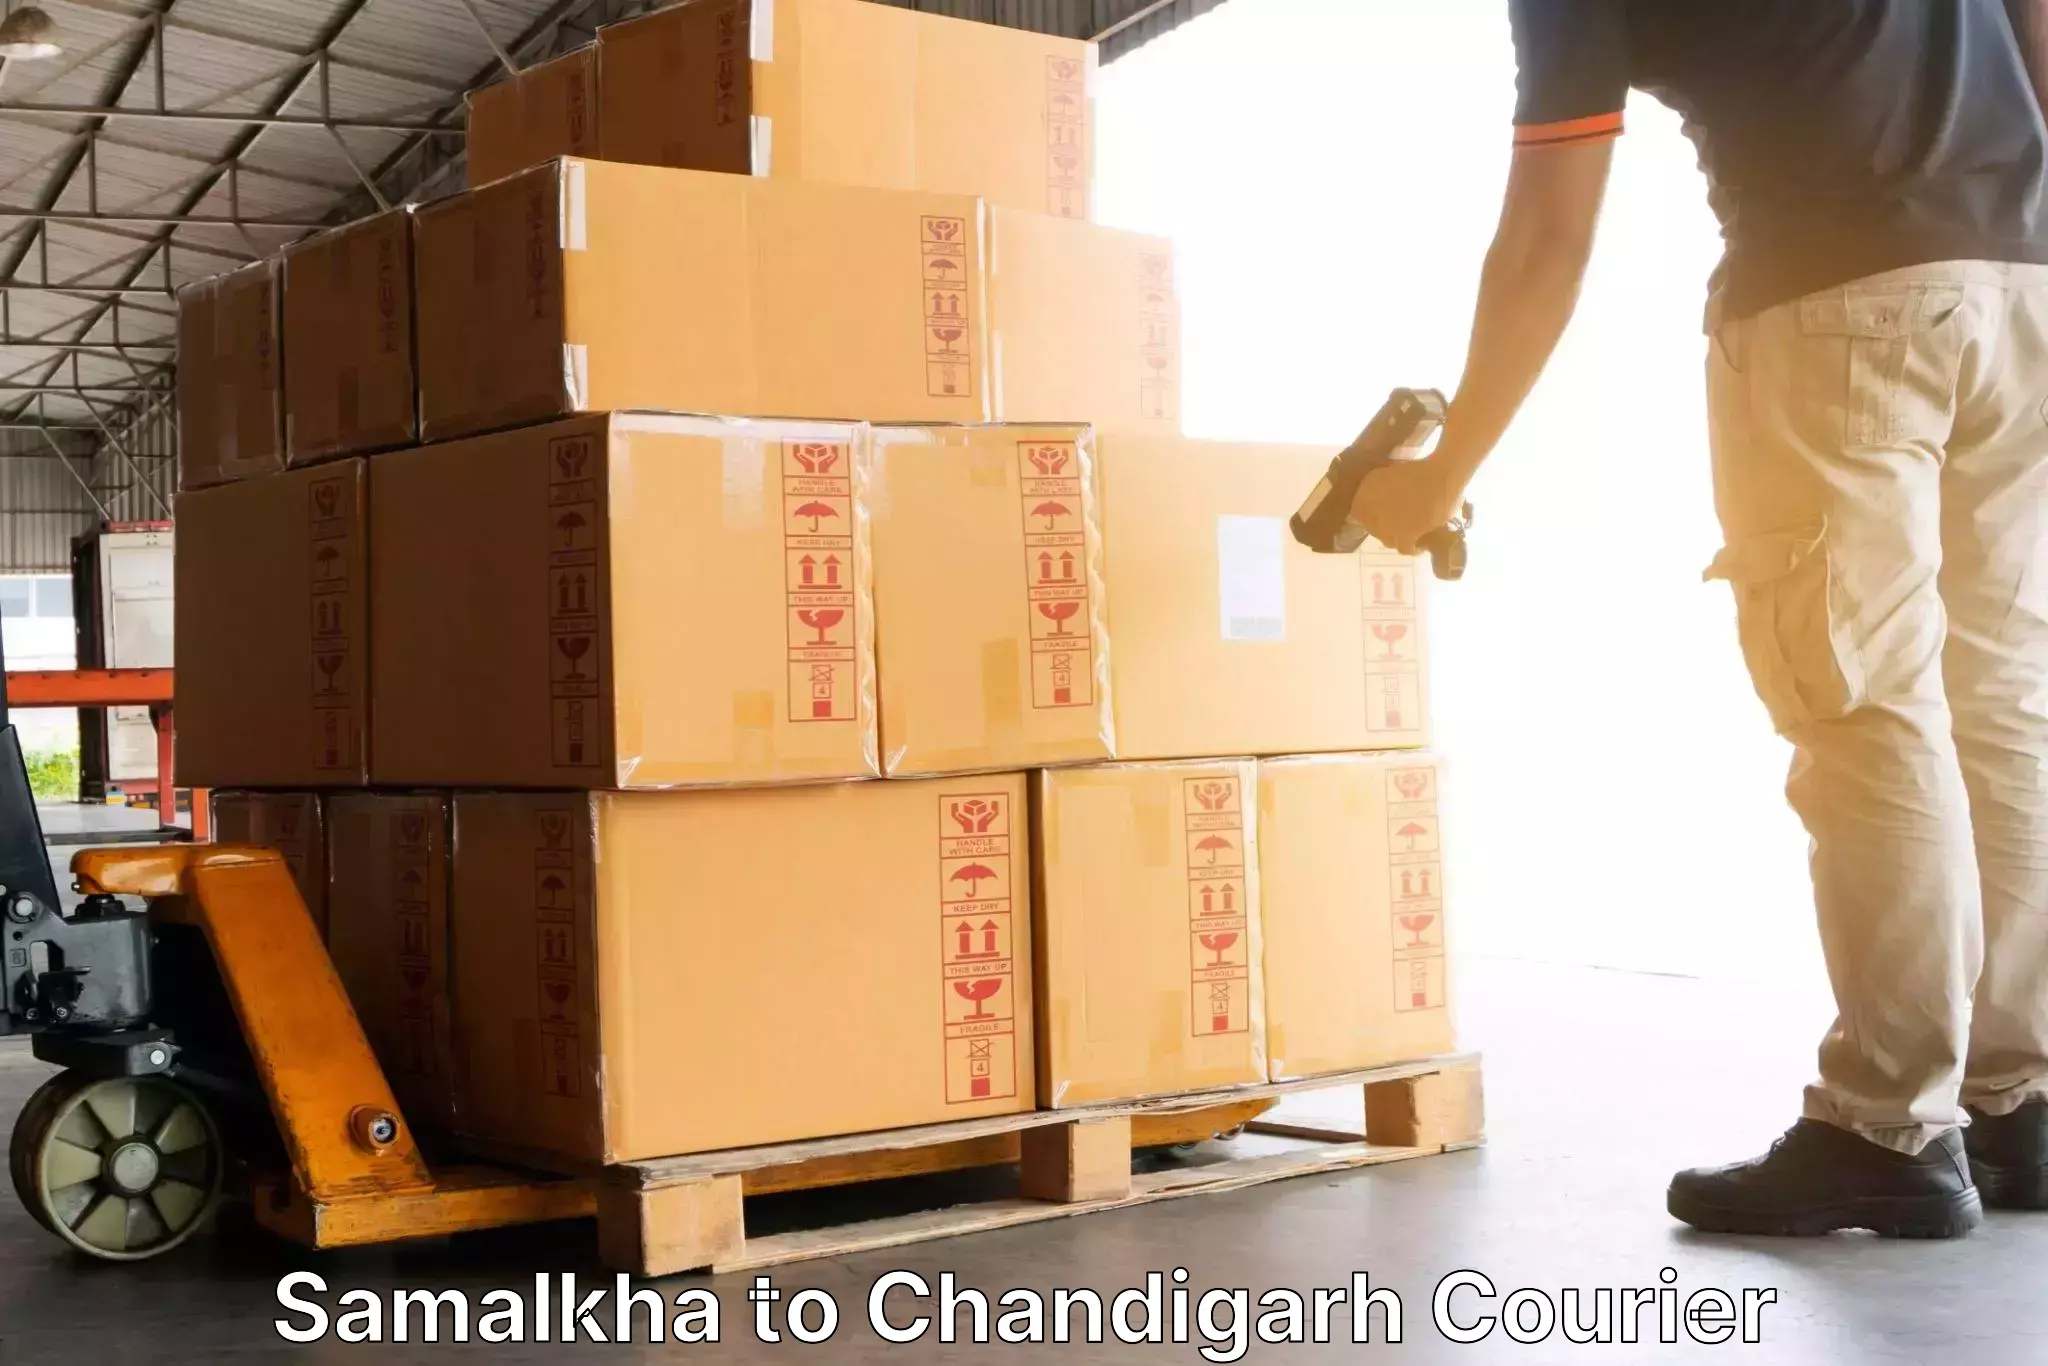 Courier service efficiency Samalkha to Chandigarh